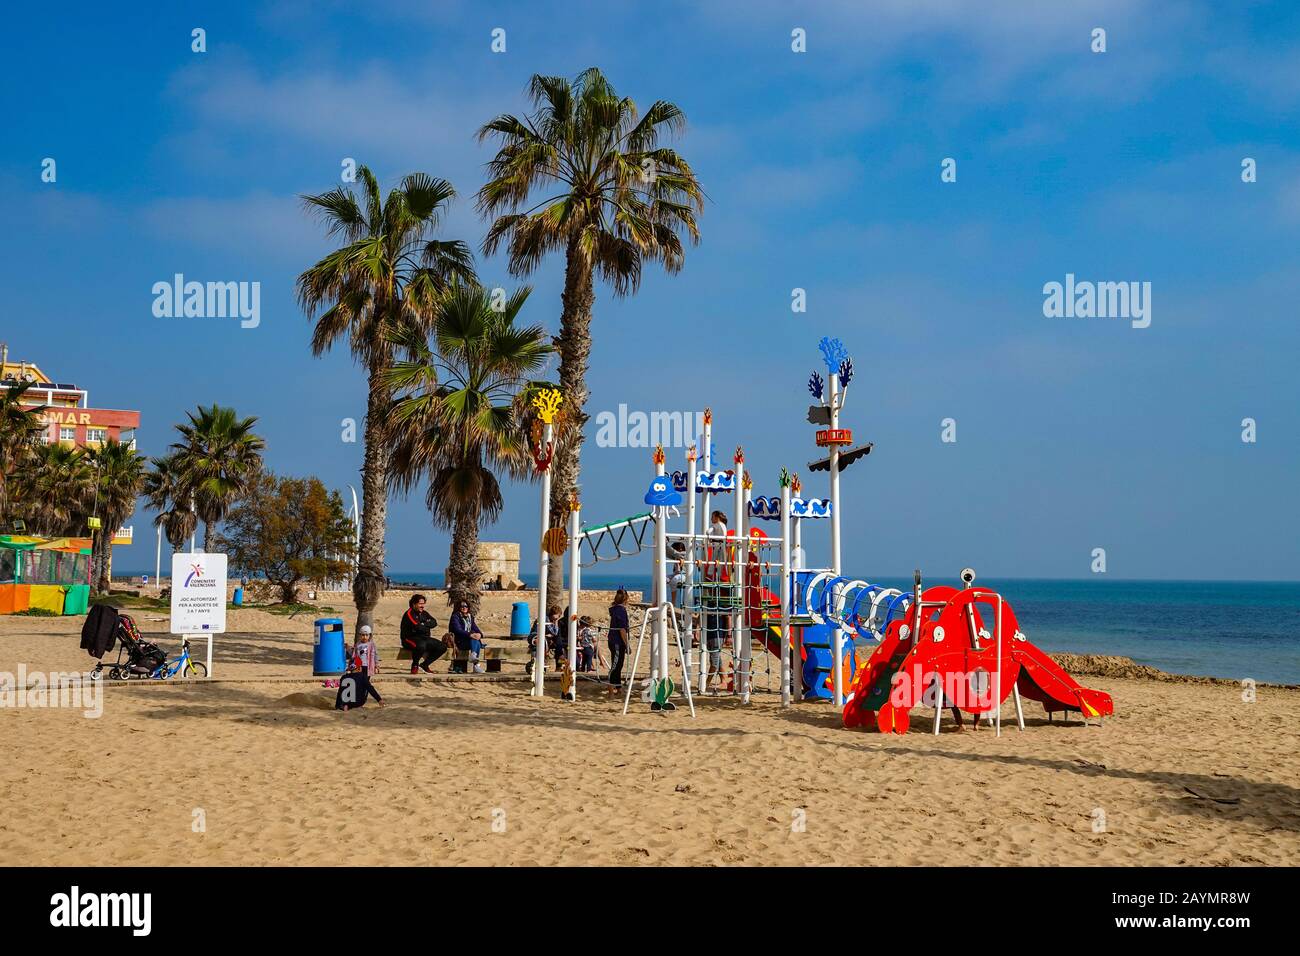 Children's play area and palm trees, The beach-front at La Mata, Torrevieja, Costa Blanca, Spain Stock Photo